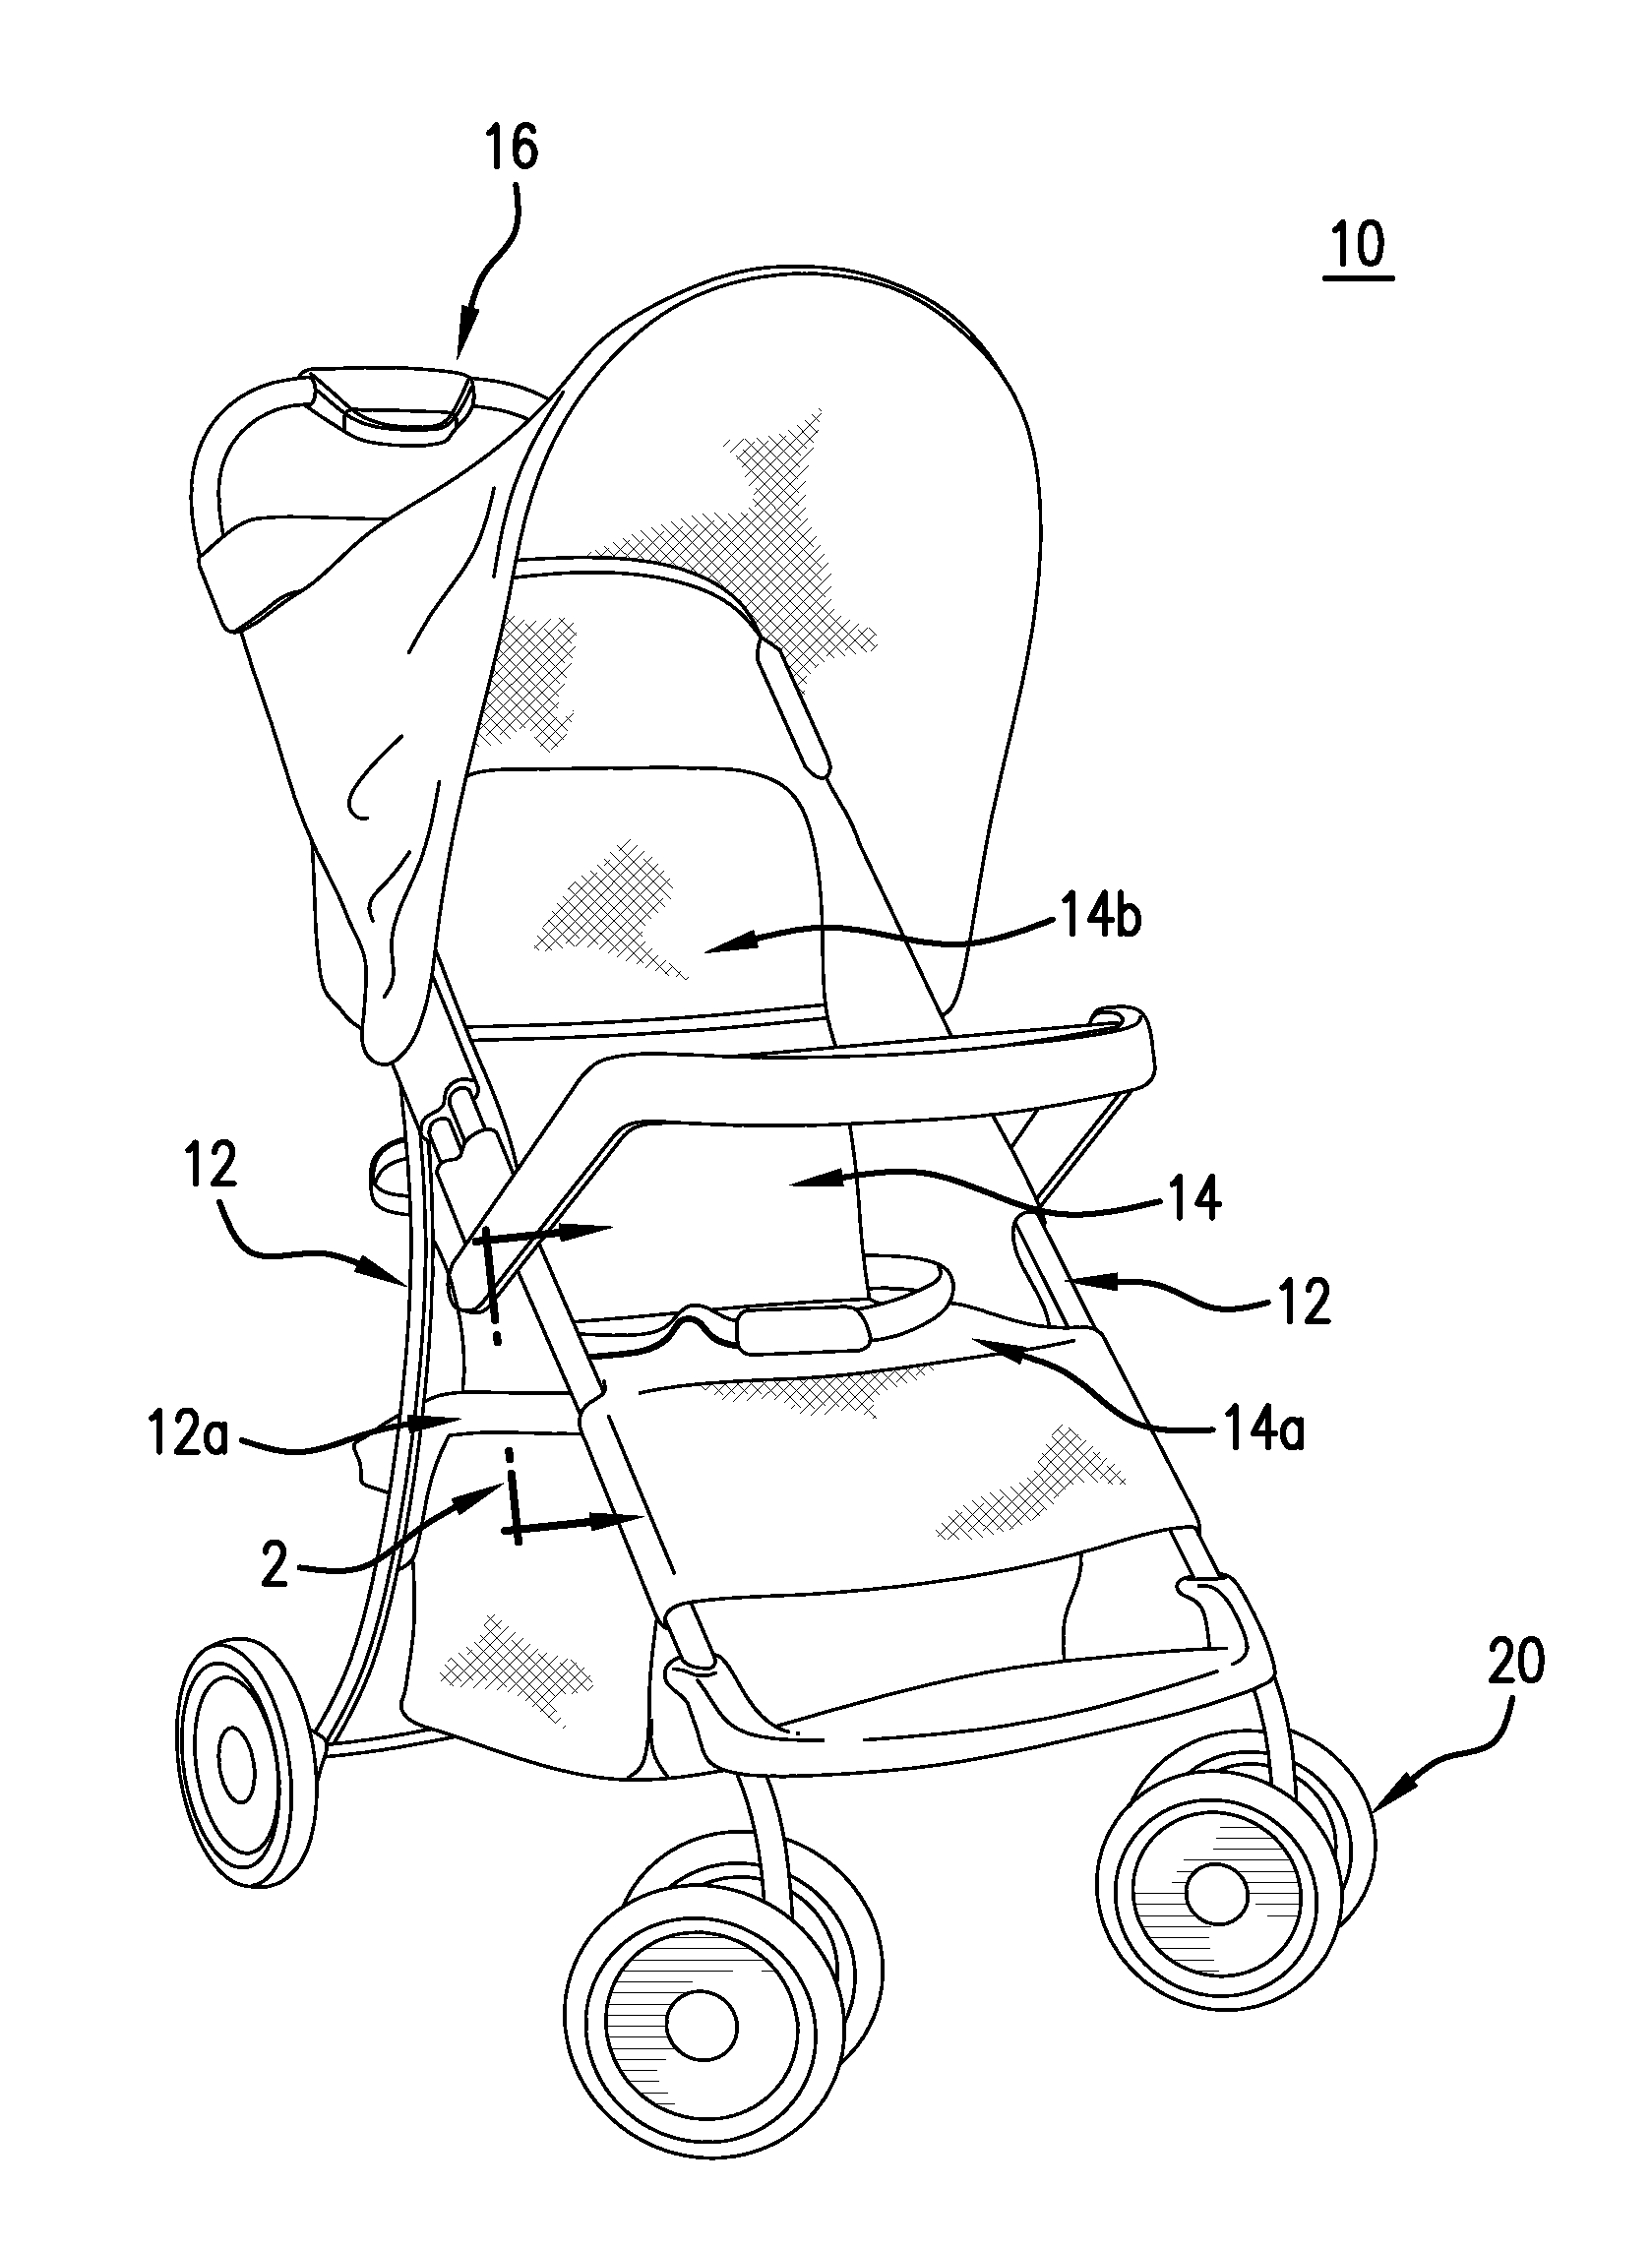 Alarm for baby strollers